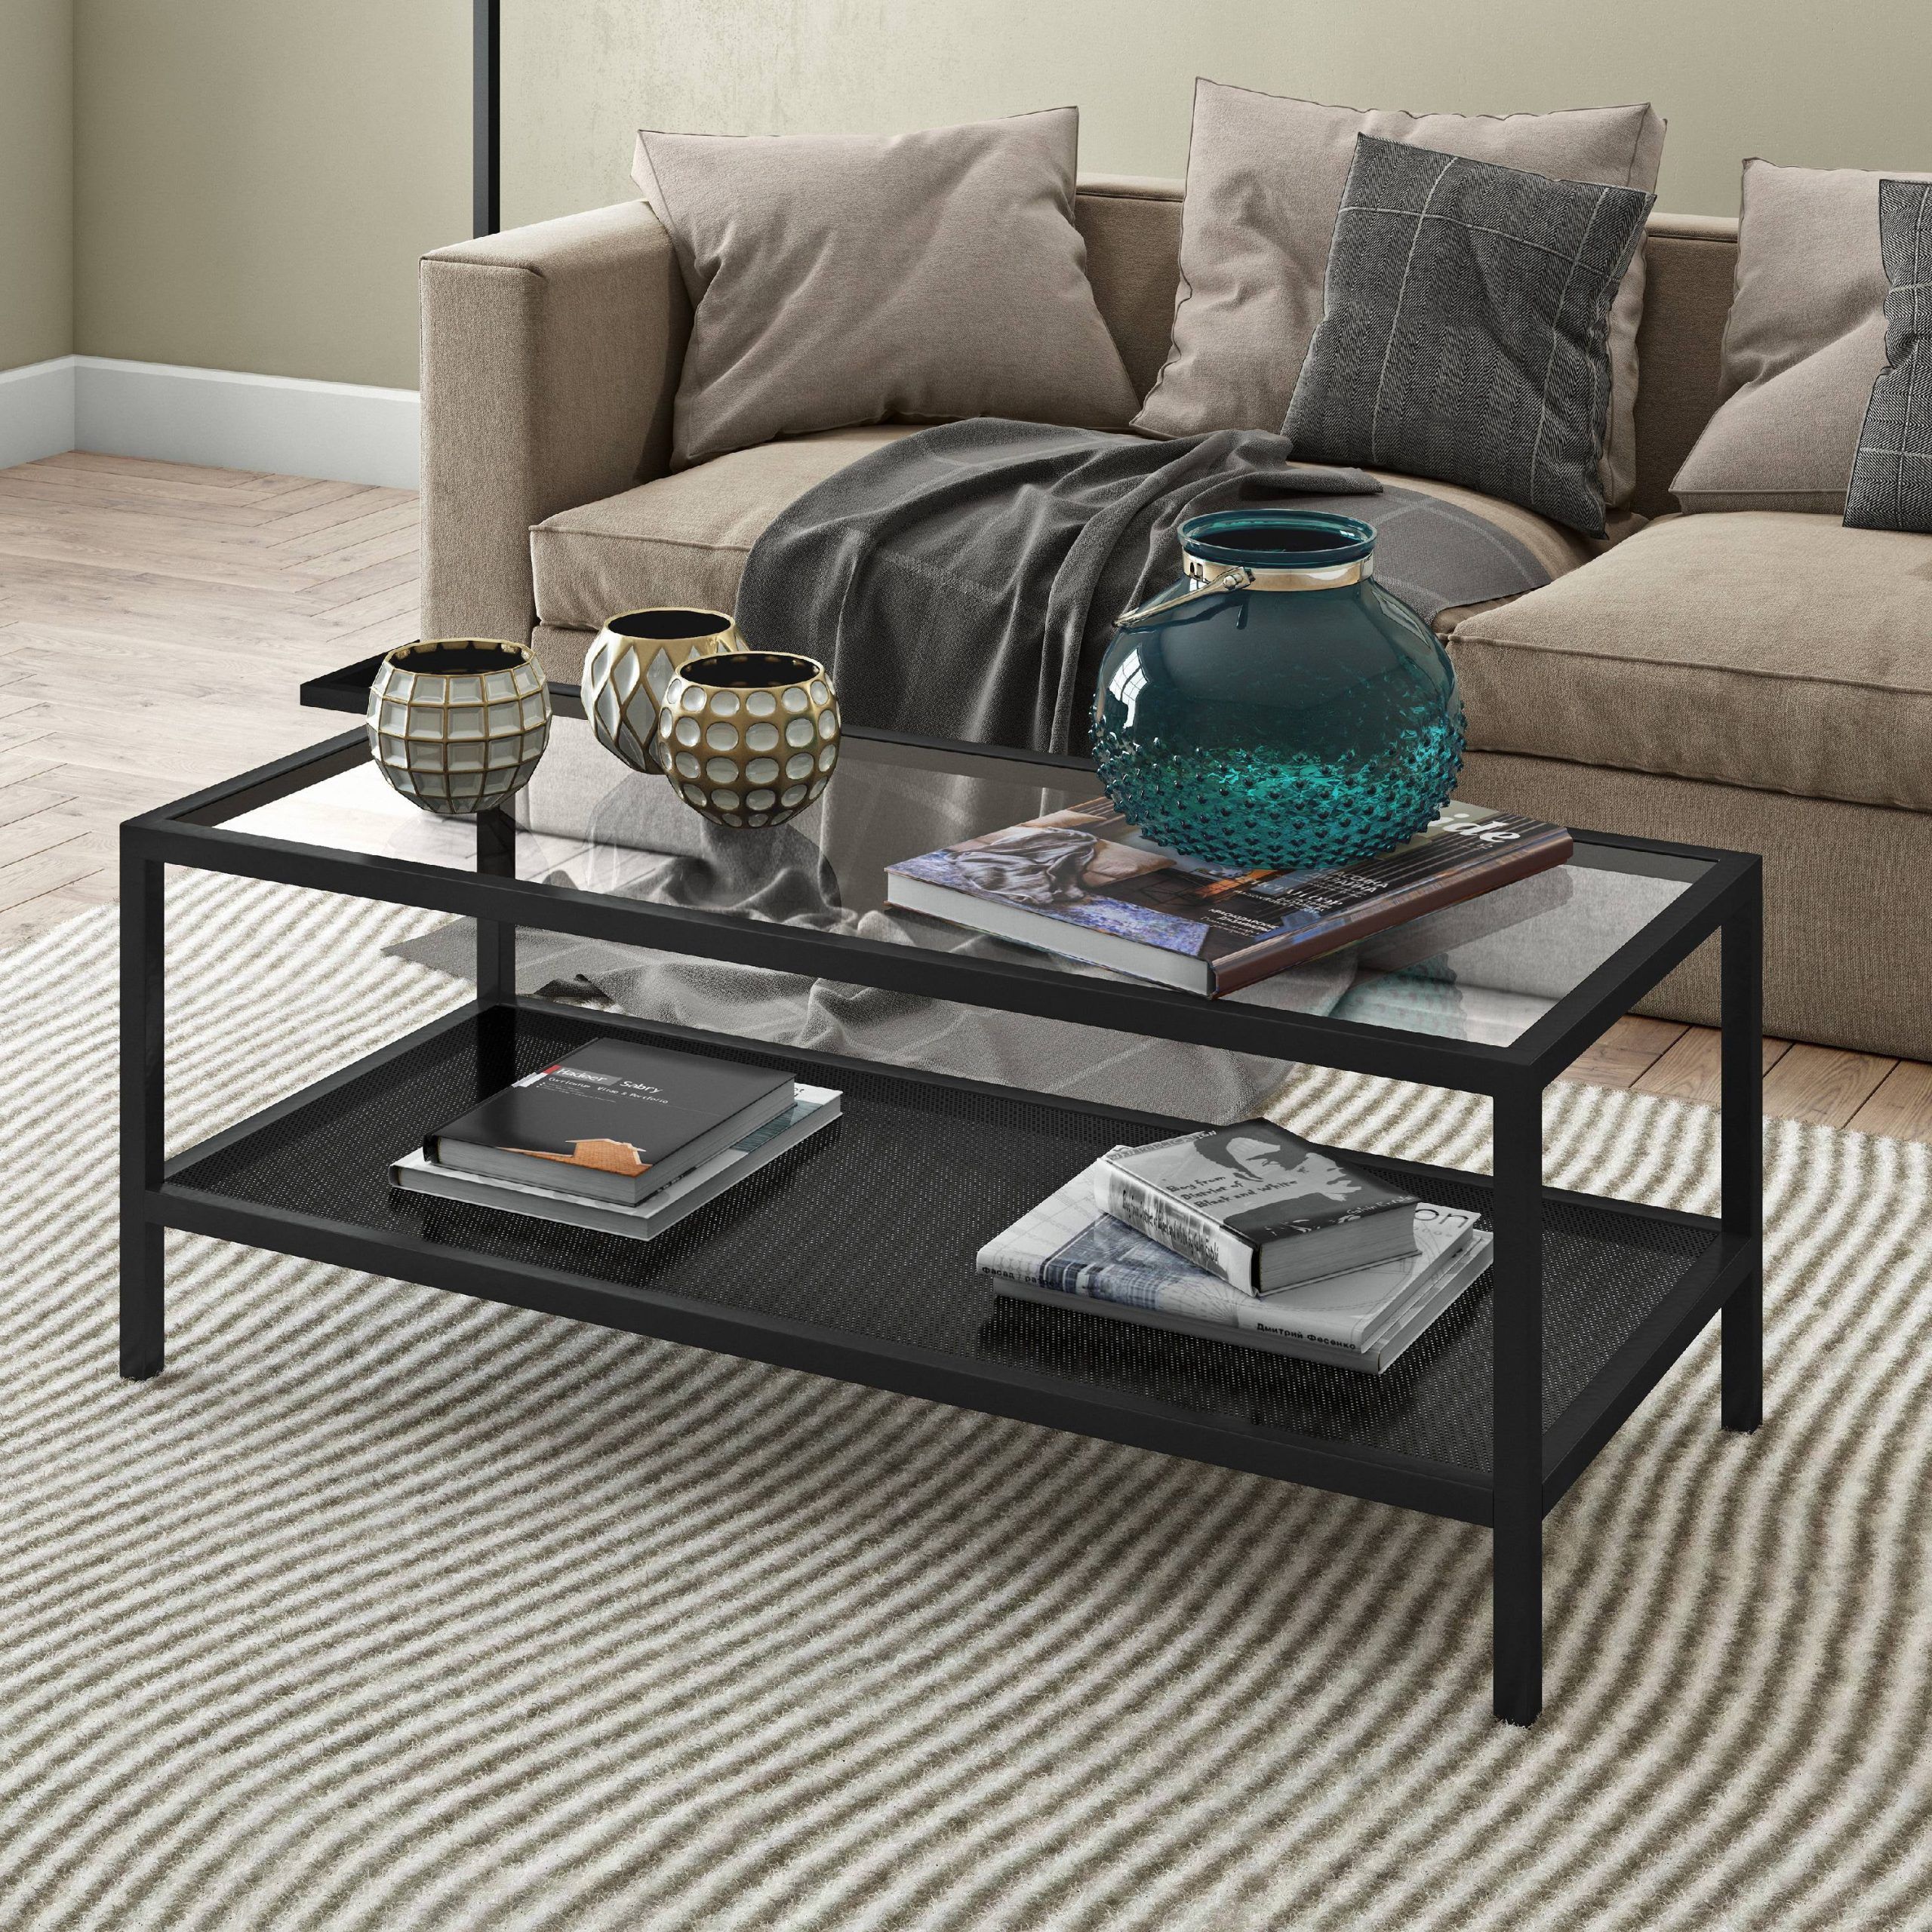 Evelyn&zoe Contemporary Metal Coffee Table With Glass Top – Walmart In Glass Top Coffee Tables (View 9 of 15)